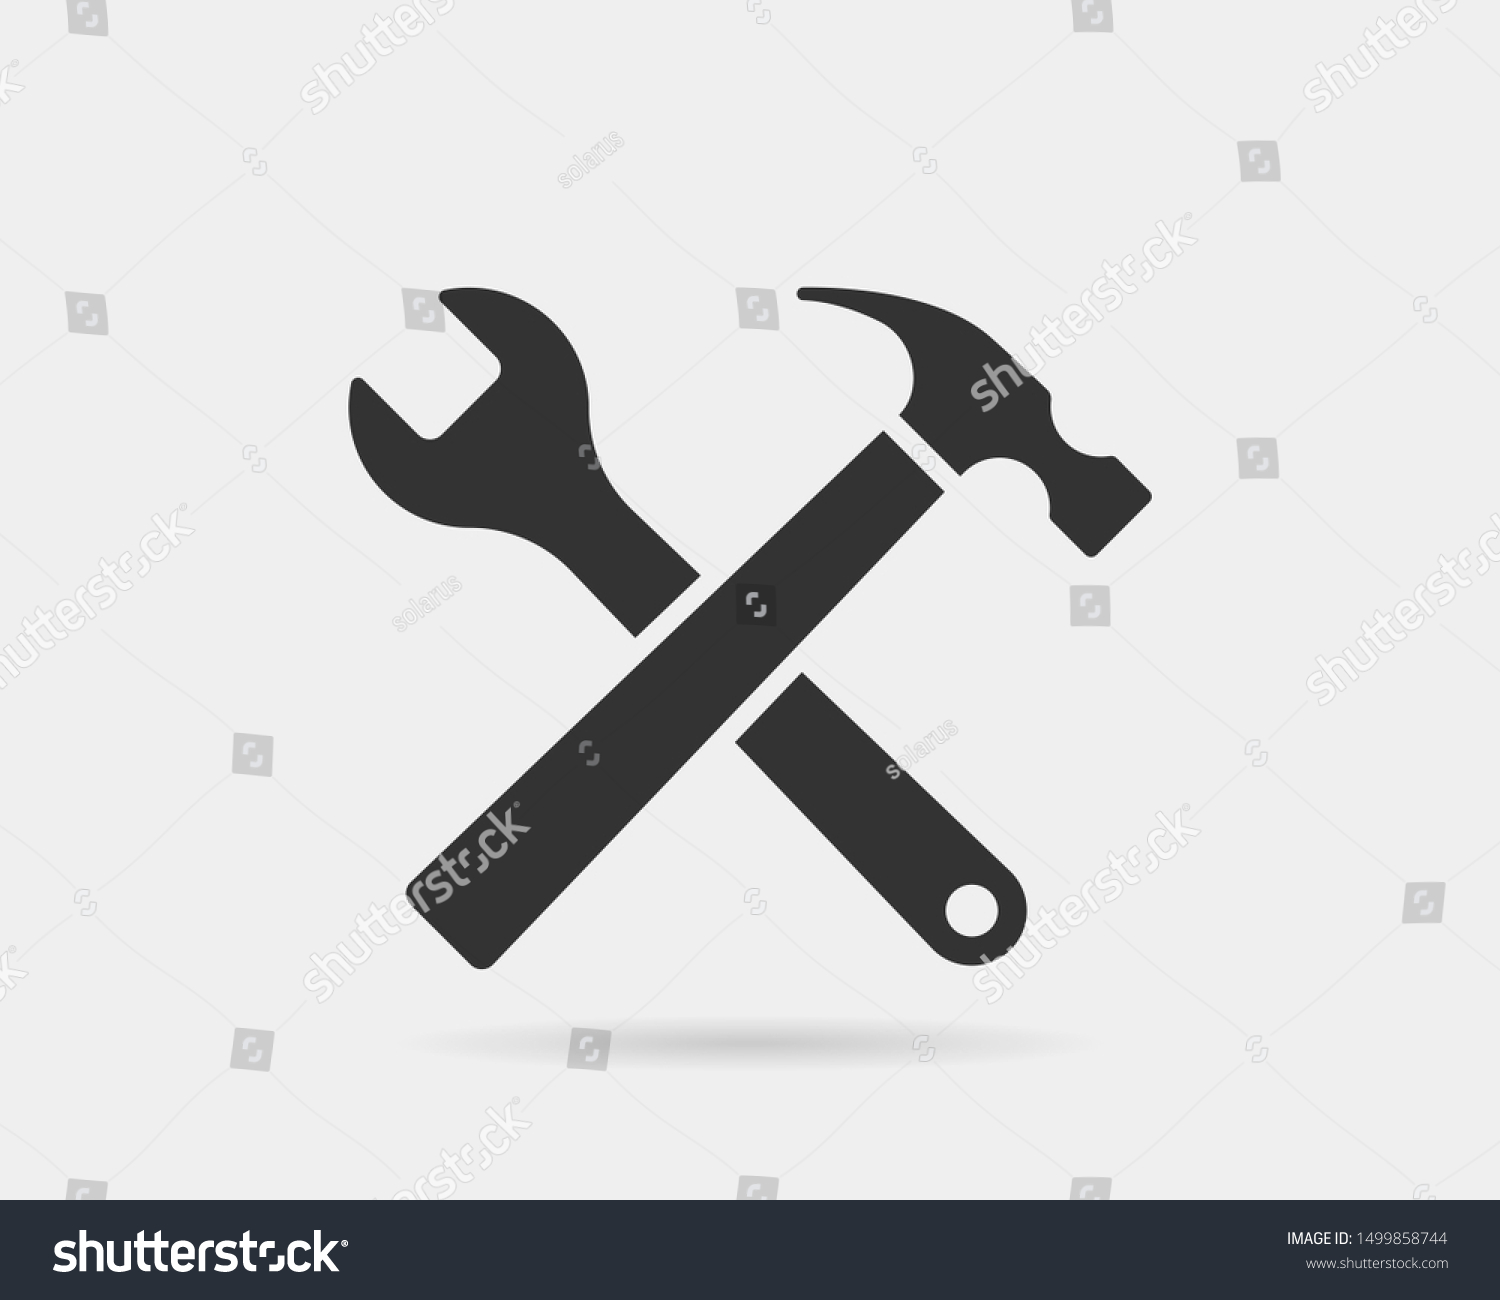 Tools vector wrench icon. Spanner logo design element. Key tool isolated on white background #1499858744